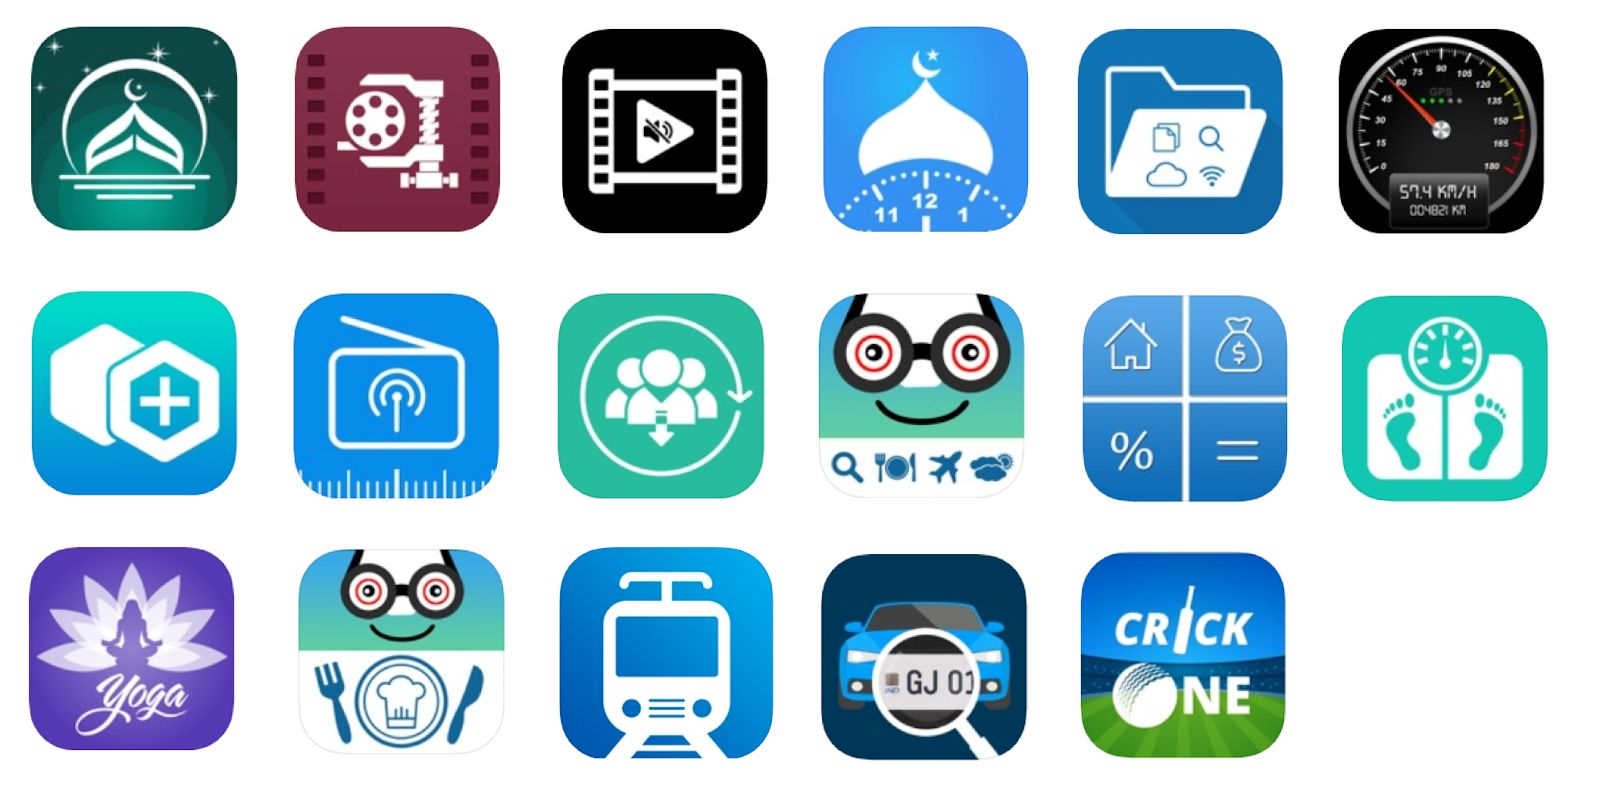 The infected apps icons